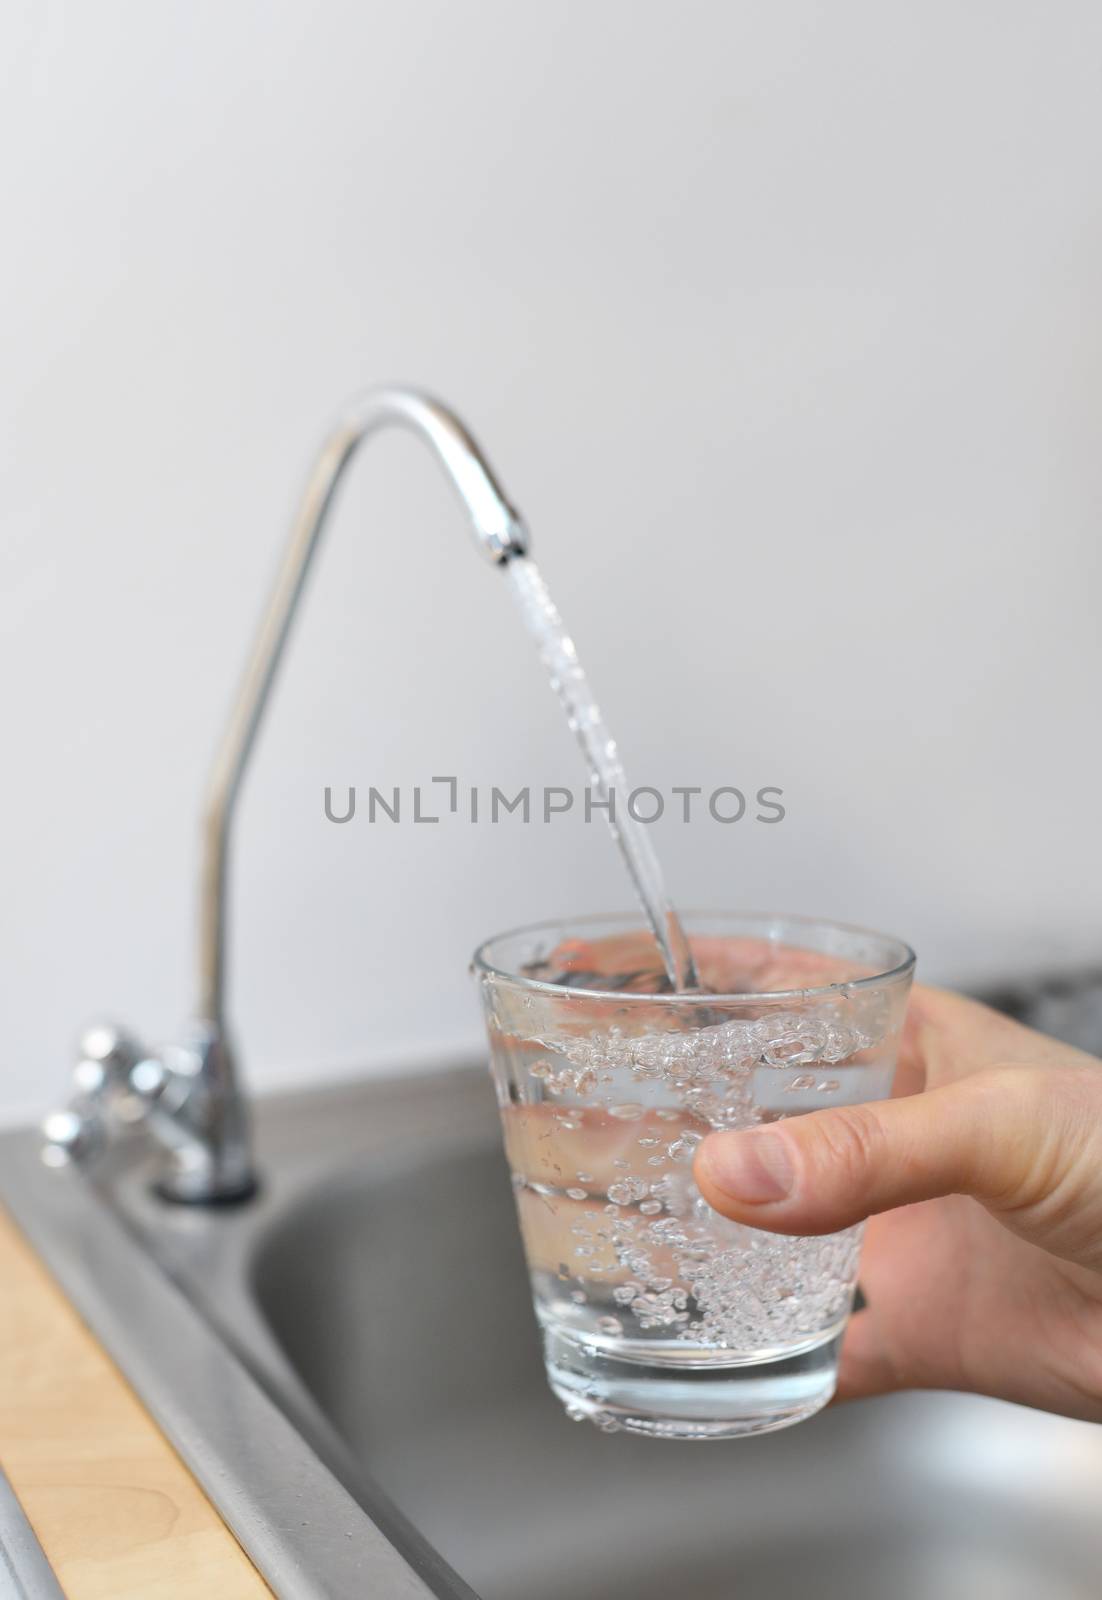 A glass of water from filter tap